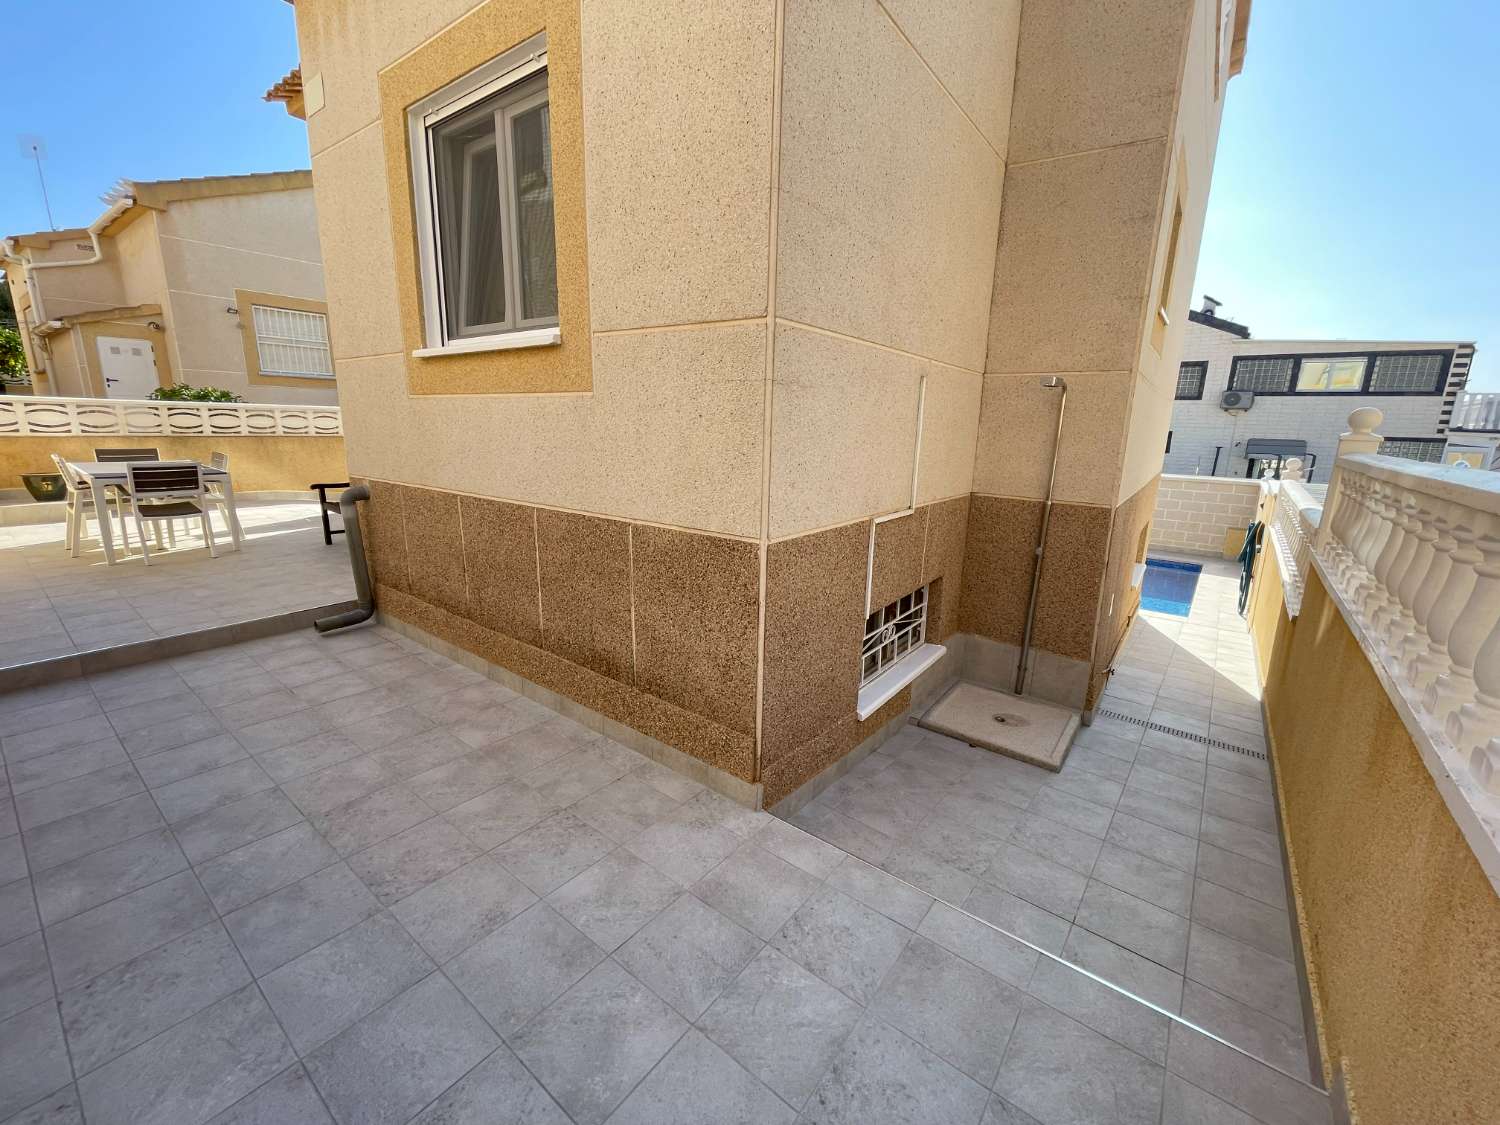 Beautifully renovated 3 bedroom 2 bathroom detached villa with private pool.